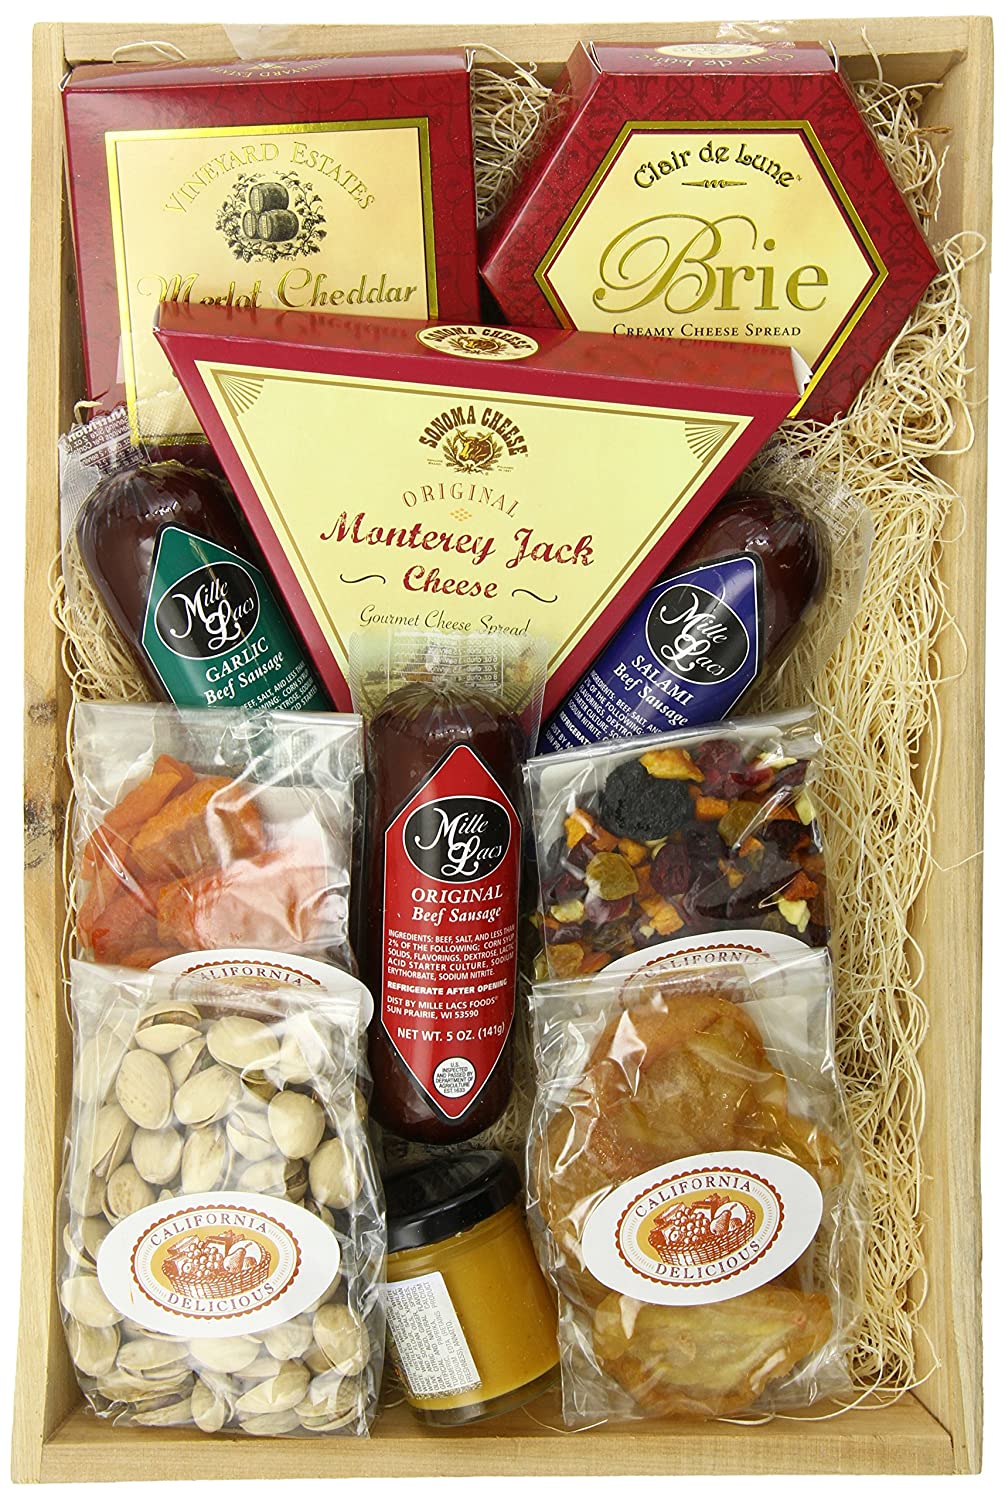 California Delicious Meat and Cheese Gift Crate Deluxe